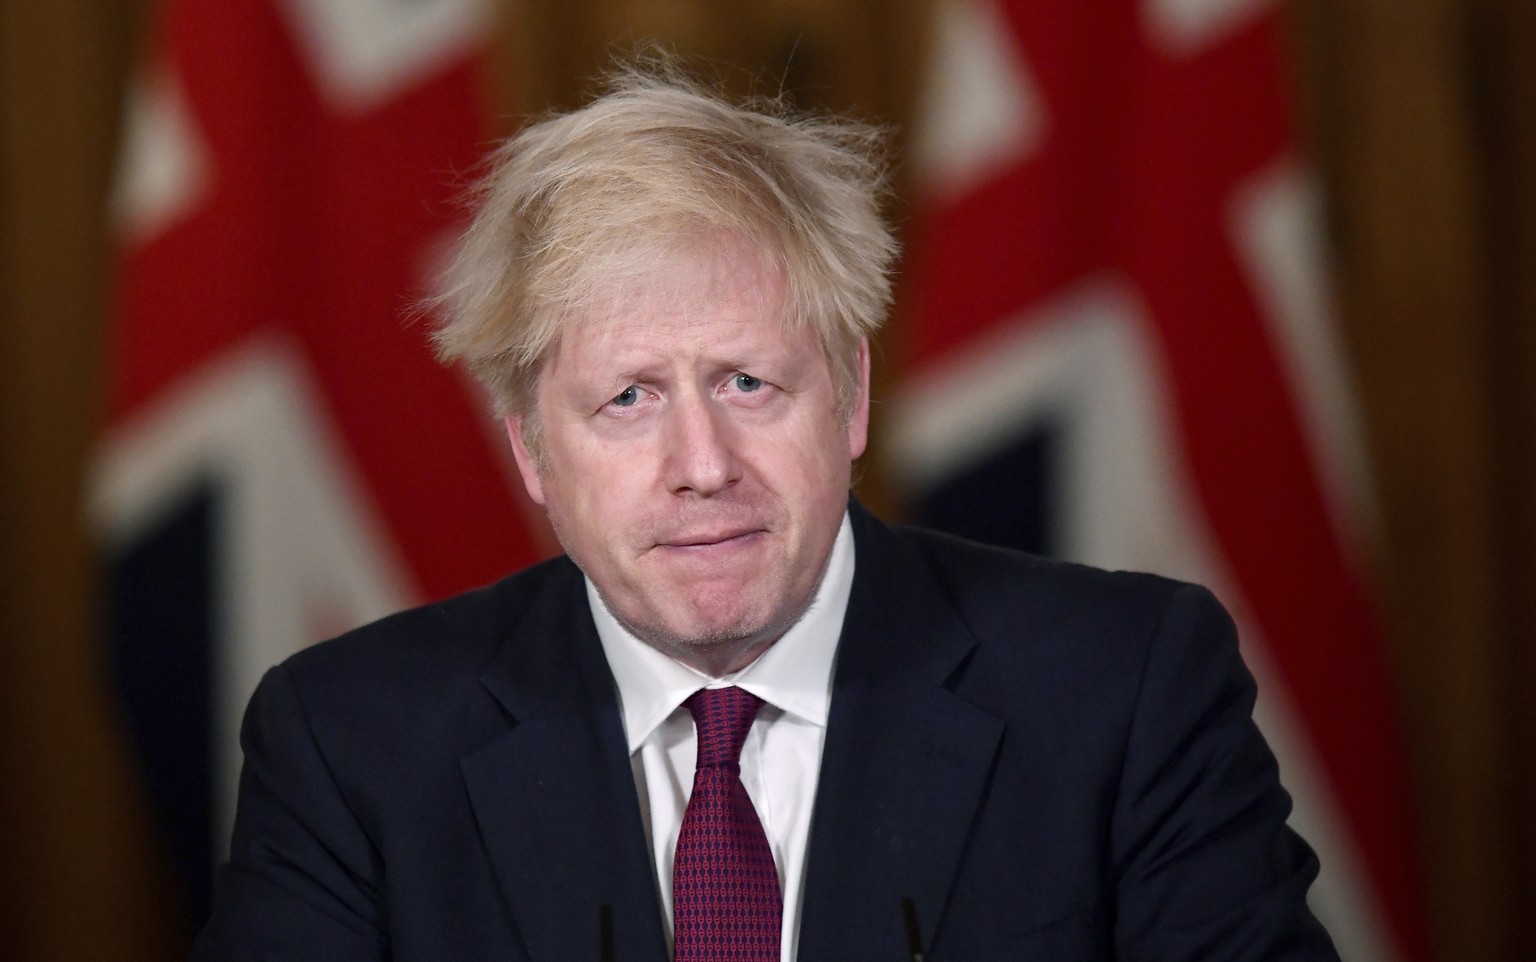 Britain&#039;s Prime Minister Boris Johnson speaks during a news conference in response to the ongoing situation with the coronavirus (COVID-19) pandemic, inside 10 Downing Street, London, Saturday, D ...